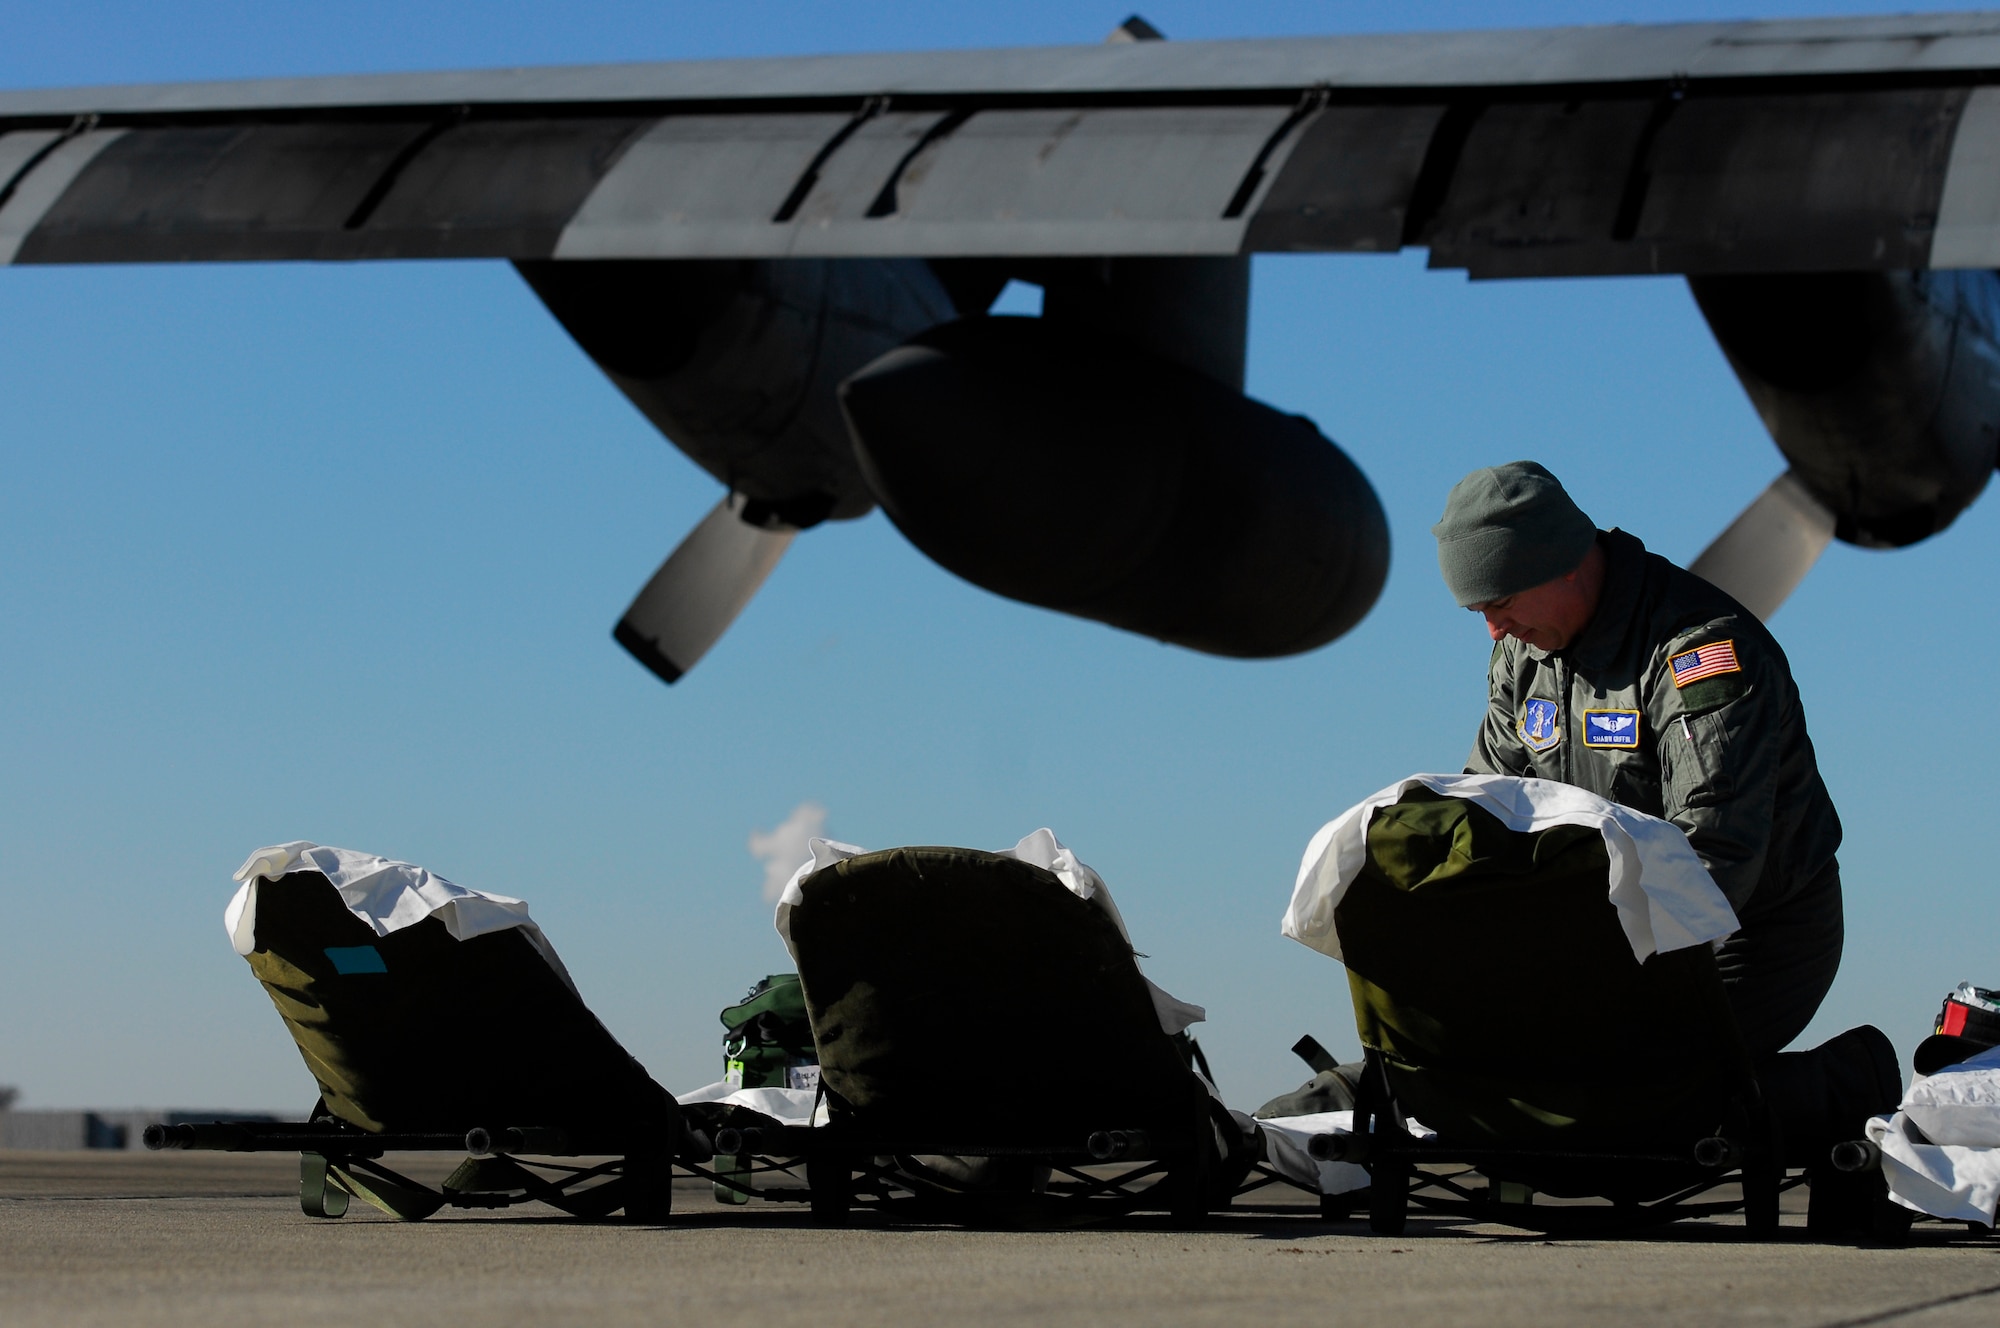 U.S. Air Force 1st Lt. Shawn Griffin, 156th Aeromedical Evacuation Squadron, readies litters for patients during an aeromedical training mission at the North Carolina Air National Guard Base, Charlotte Douglas Intl. Airport, Jan. 9, 2015. The training mission scenario is to transfer patients from Landstuhl Medical Center, Germany, to Malcolm Grove Medical Center, Md. (U.S. Air National Guard photo by Staff Sgt. Julianne M. Showalter, 145th Public Affairs/ Released)